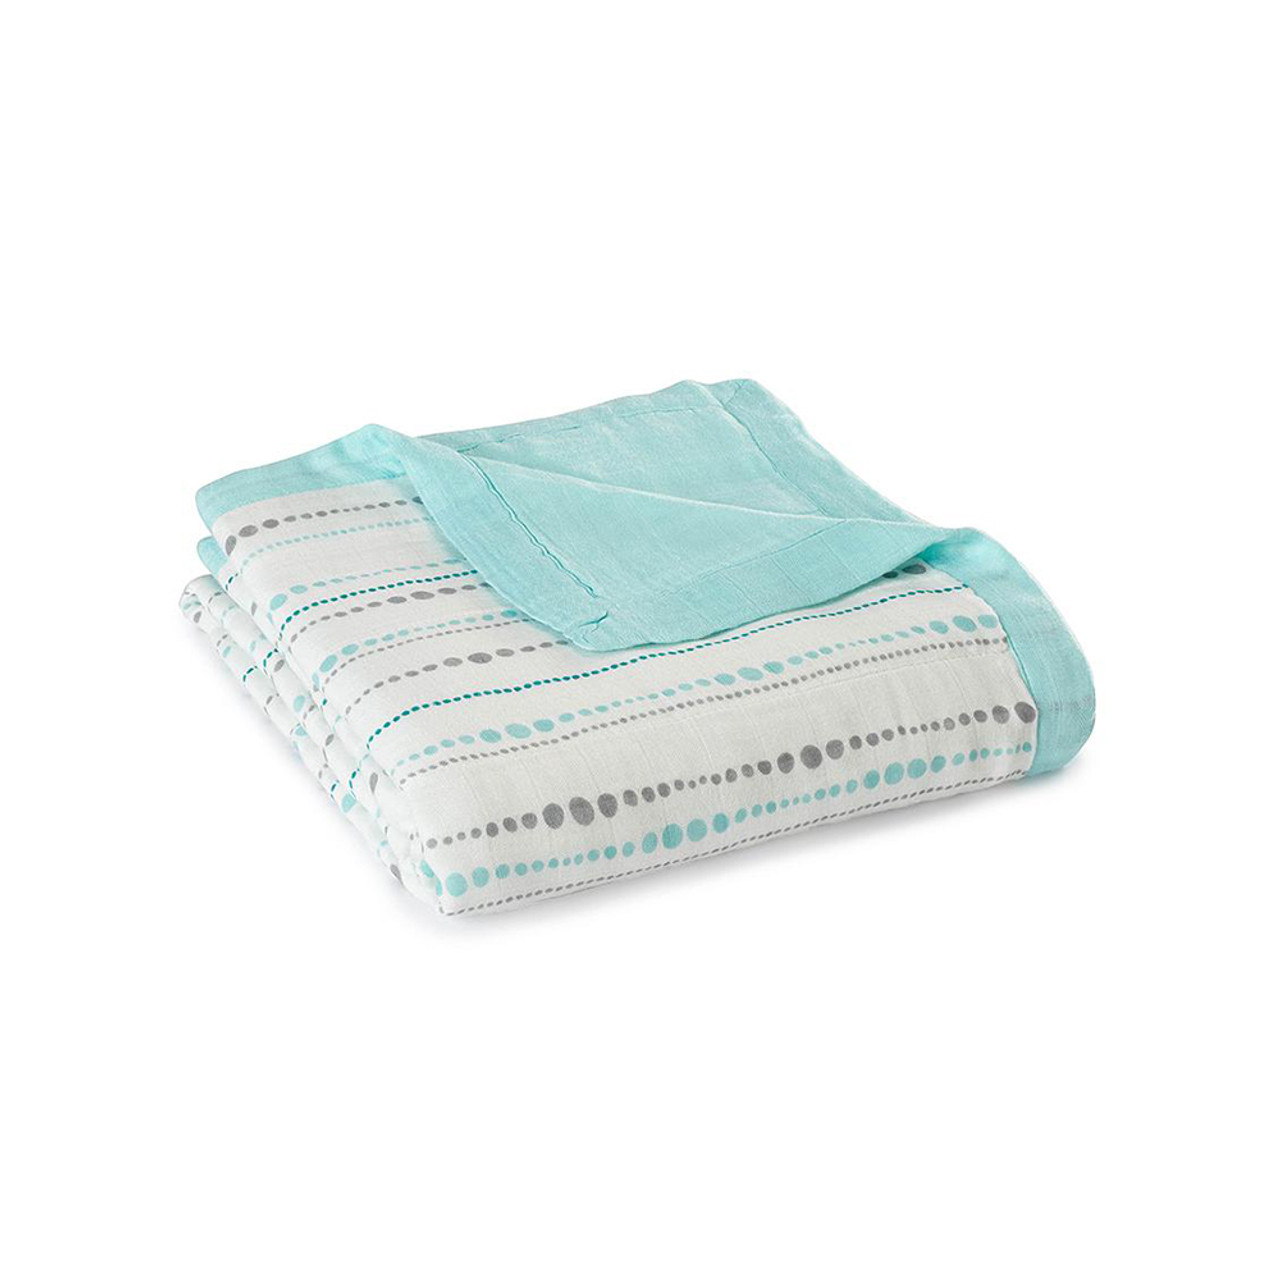 aden + anais Silky Soft Swaddle Blanket,100% Bamboo Viscose Muslin Blankets  for Girls & Boys, Baby Receiving Swaddles, Ideal Newborn & Infant